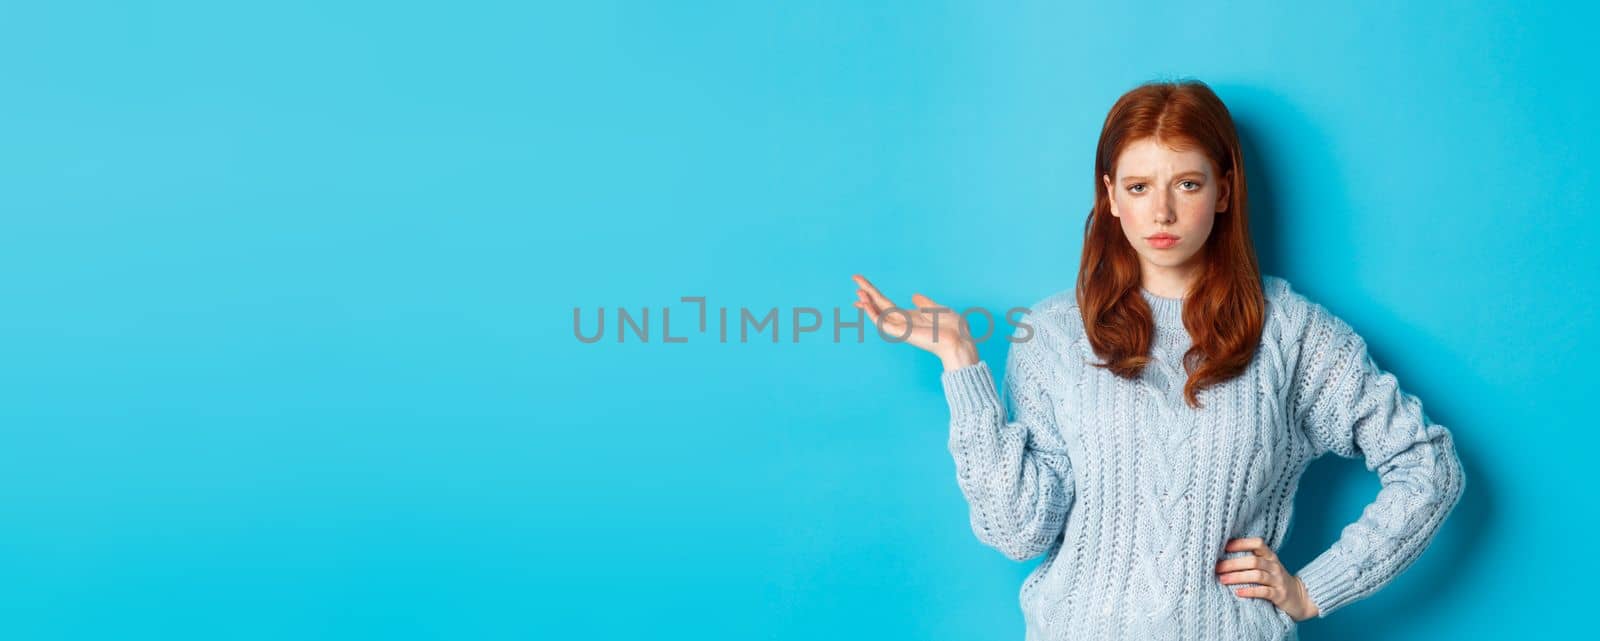 Skeptical teenage girl looking unamused, raising hand in so what gesture, staring at something with careless face, standing over blue background.